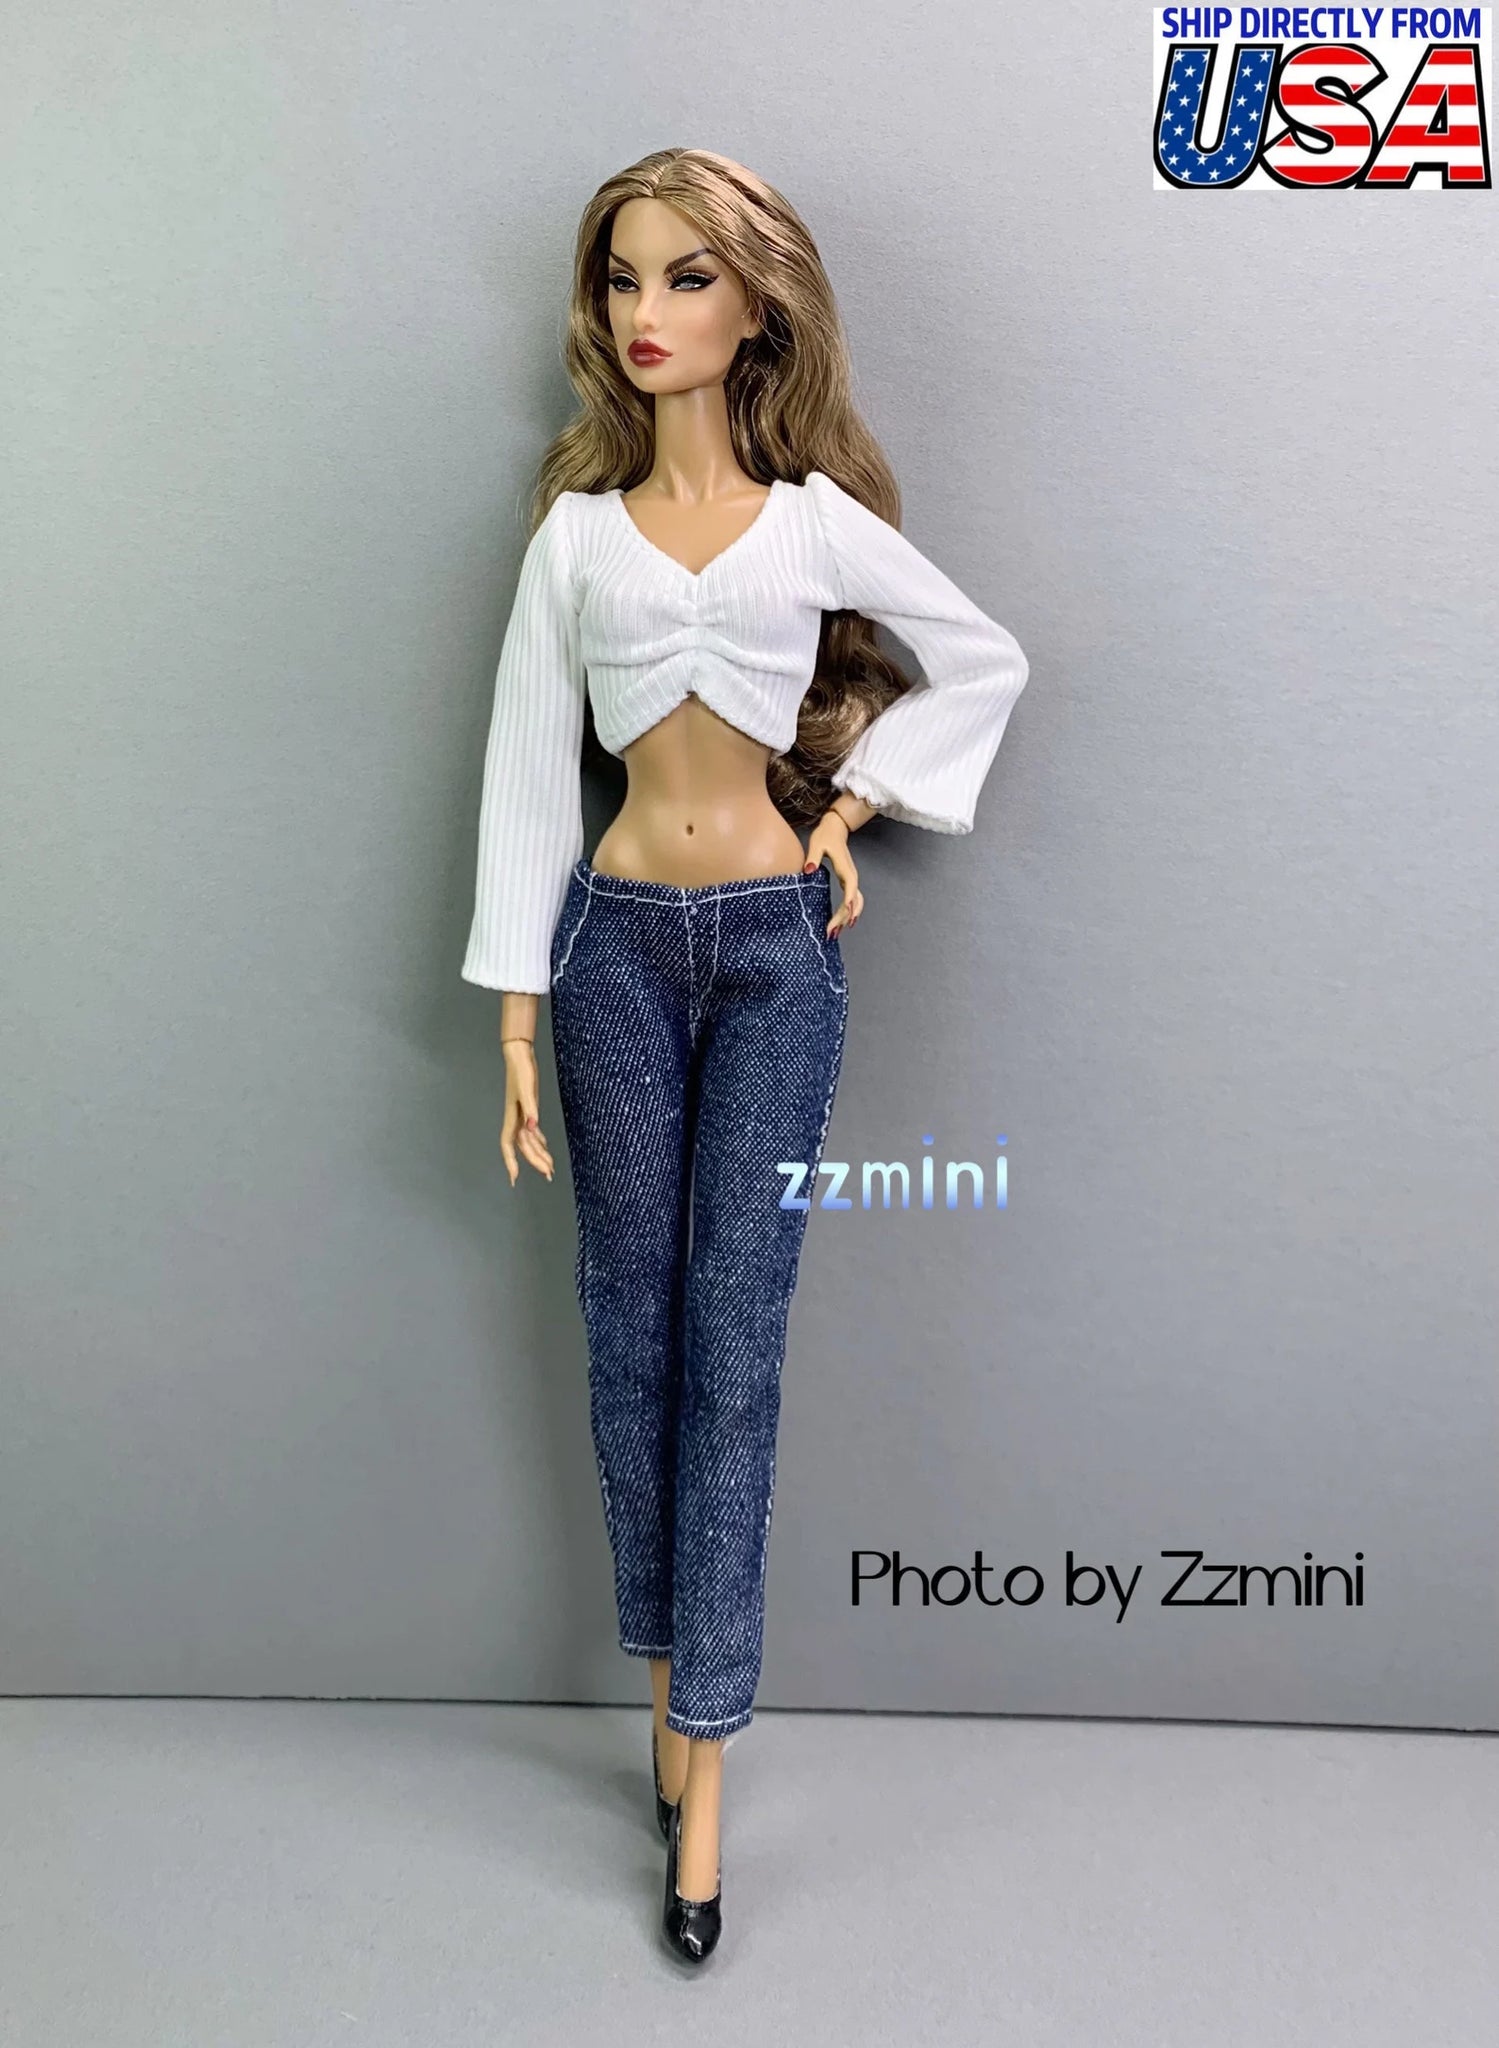 2pcs Handmade White Sleeves and Jeans For 11.5inch Fashion Doll Princess Top Doll Clothes 1/6 Toy